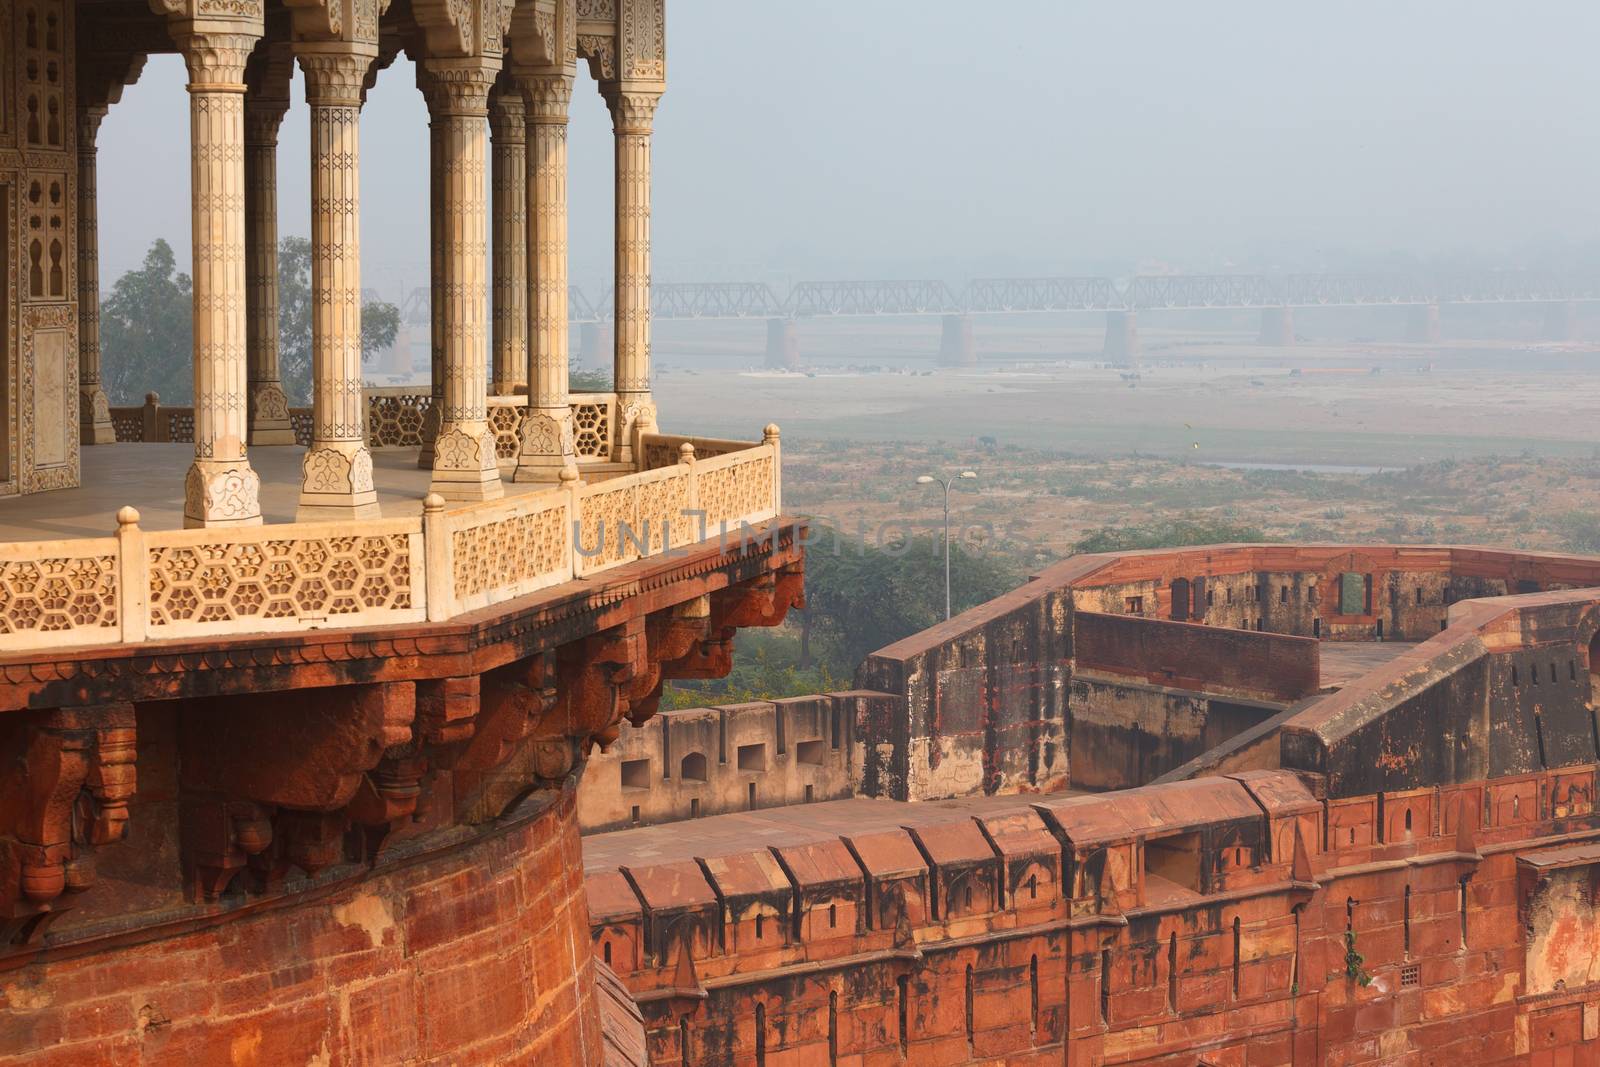 Balcony and gallery of Agra fort, India